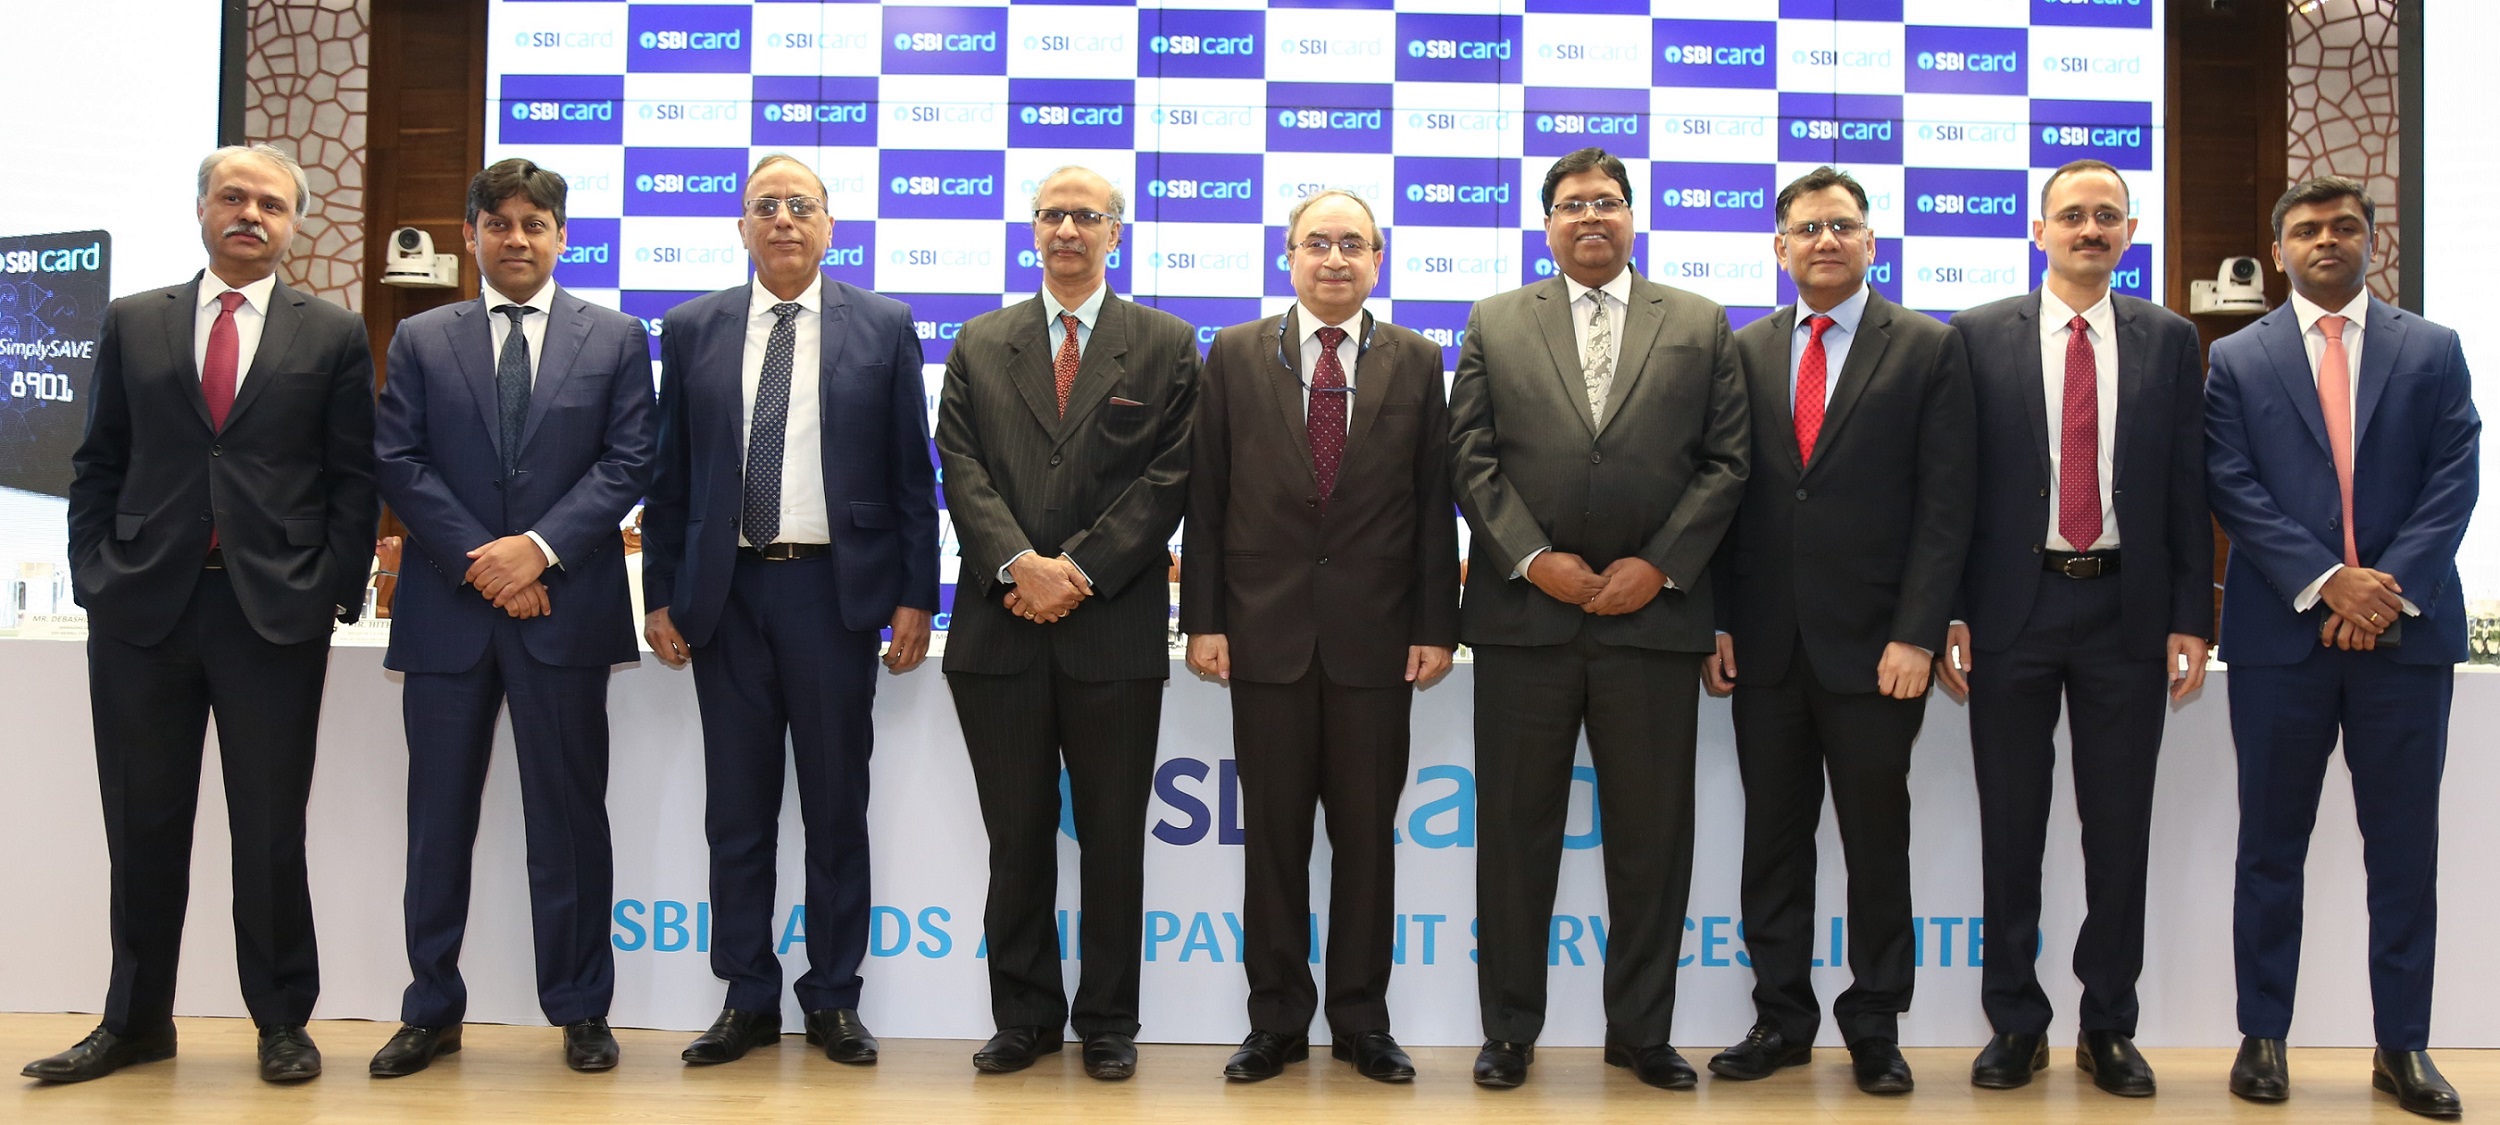 (L-R): Mr. Hitendra Dave (Head of Global Banking & Markets, HSBC Securities and Capital Markets (India) Private Limited), Mr. Debashish Purohit, Managing Director, DSP Merrill Lynch Limited, Mr. Arun Mehta (Managing Director, SBI Capital Markets Limited), Mr. Ramesh Srinivasan (Kotak Mahindra Capital Company Limited), Mr. Dinesh Khara (Managing Director (Global Banking & Subsidiaries), State Bank of India), Mr. Hardayal Prasad (Managing Director & CEO, SBI Cards & Payment Services Limited), Mr. Nalin Negi (Chief Financial Officer, SBI Cards & Payment Services Limited), Mr. Salil Pitale (Joint Managing Director & Co-CEO, Axis Capital Limited) and Mr. Mangesh Ghogre (Executive Director & Head (ECM), Nomura Financial Advisory and Securities (India) Private Limited) were present at the announcement of the SBI Cards & Payment Services Limited IPO.